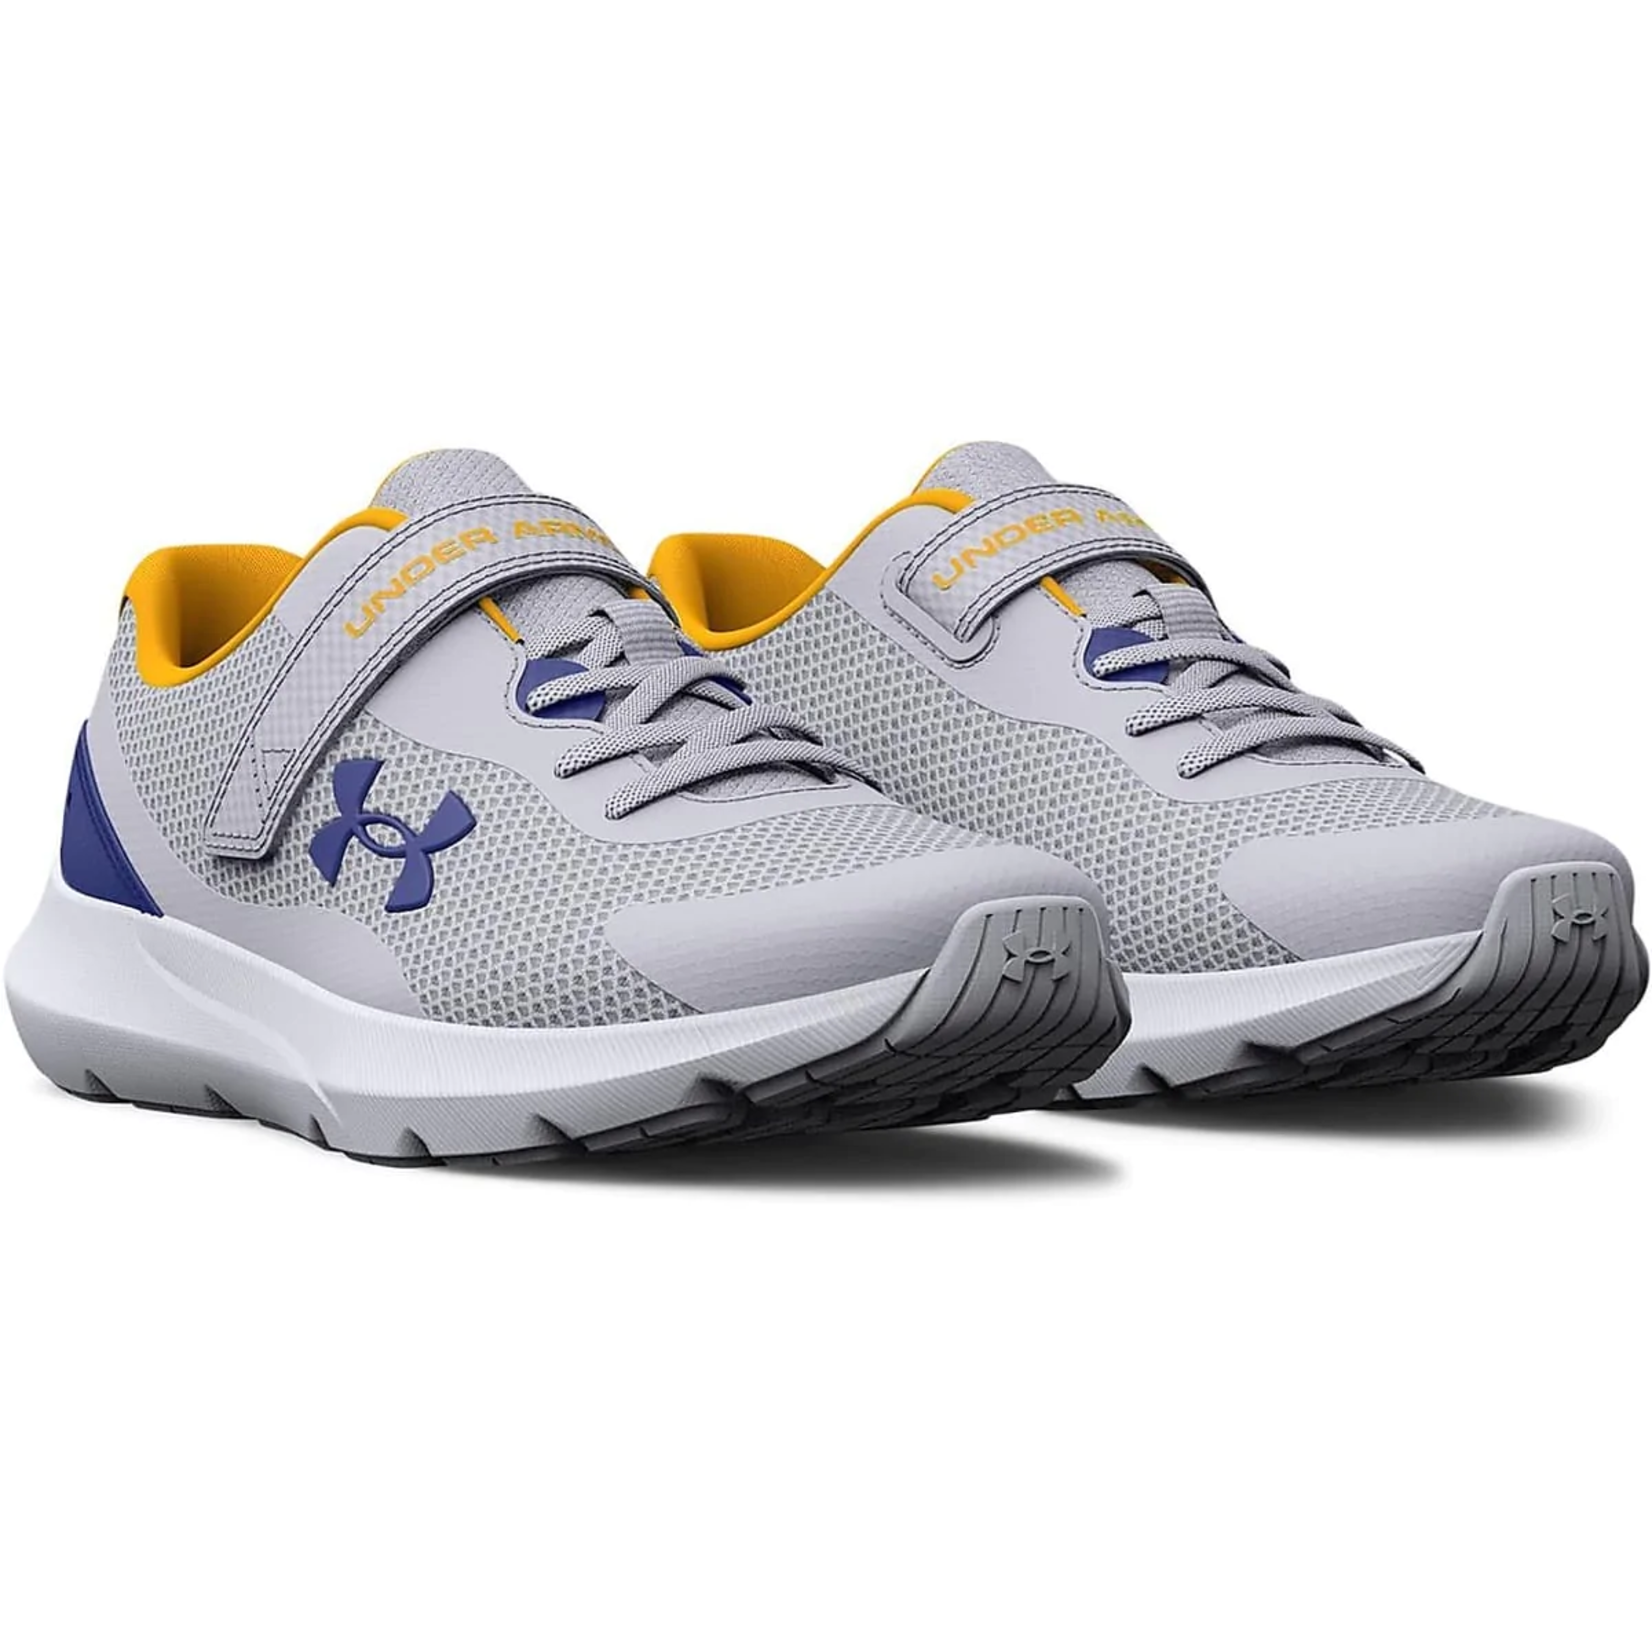 Under Armour Under Armour Running Shoes, Surge 3 AC, BPS, Boys